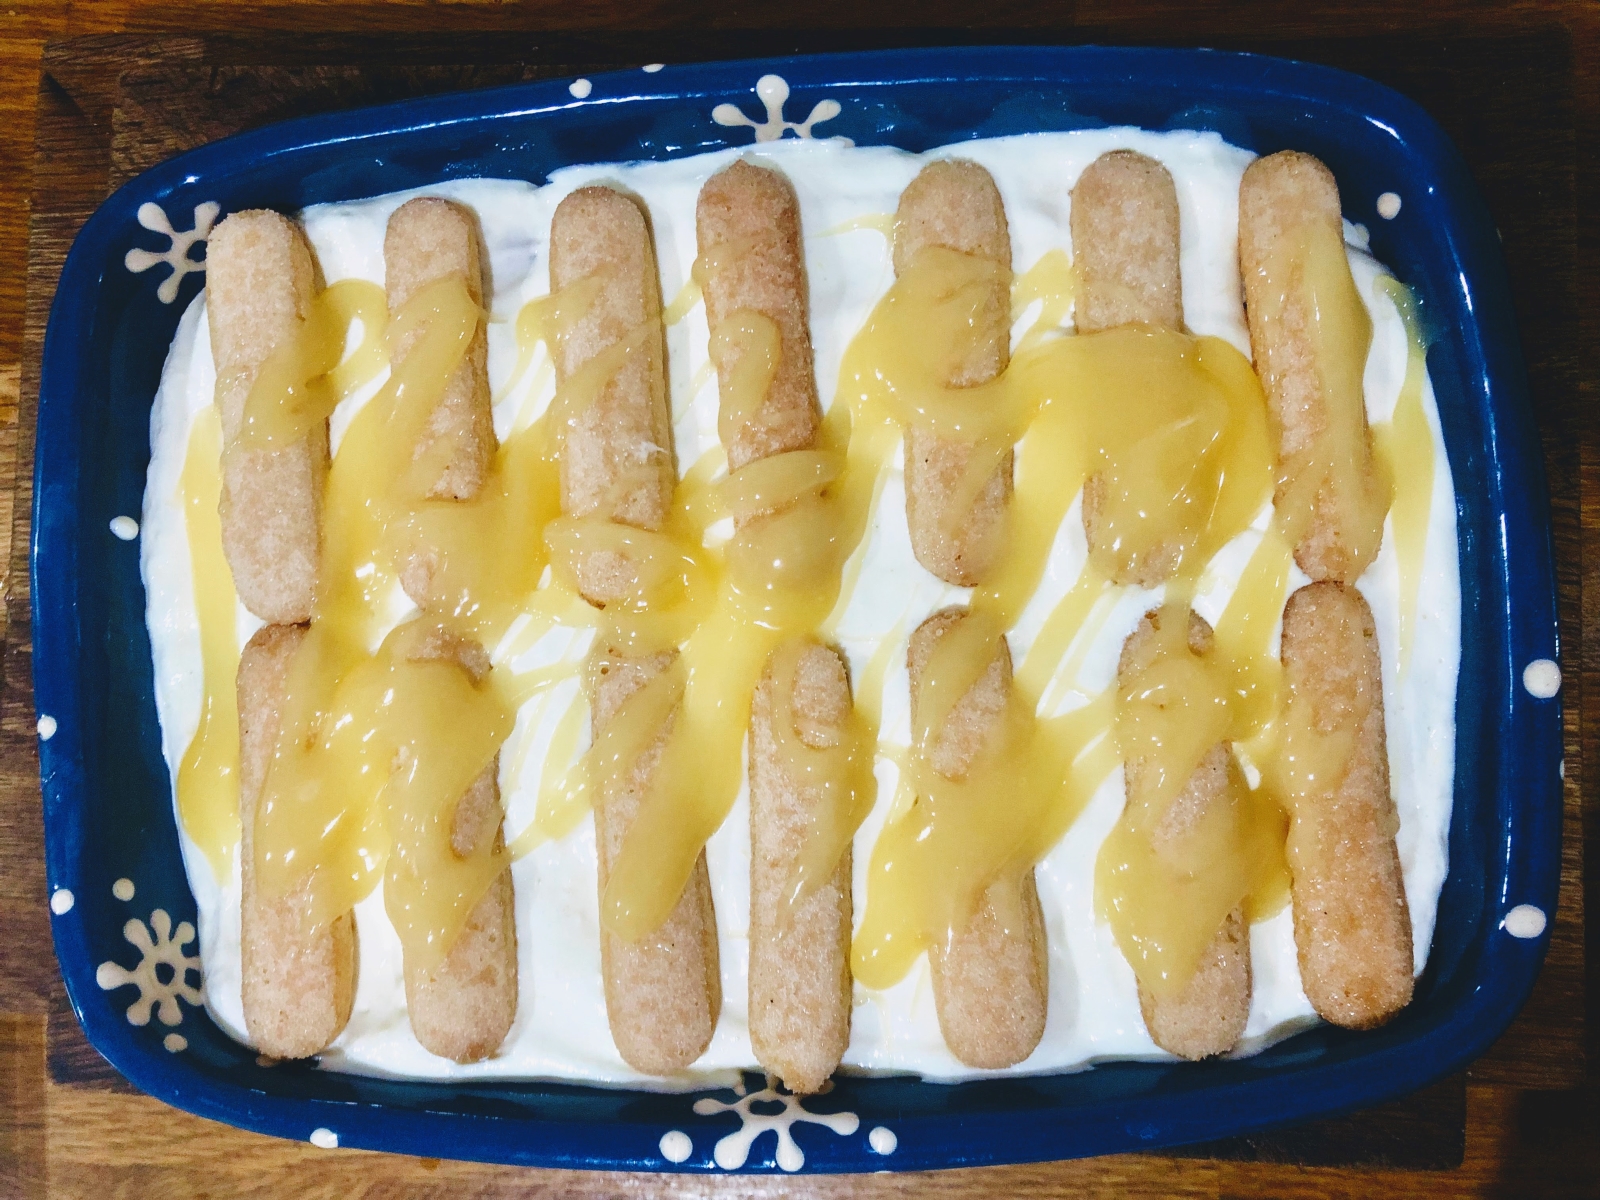 Large dish filled with lemon mascarpone cream topped with sponge fingers and a drizzle of lemon curd